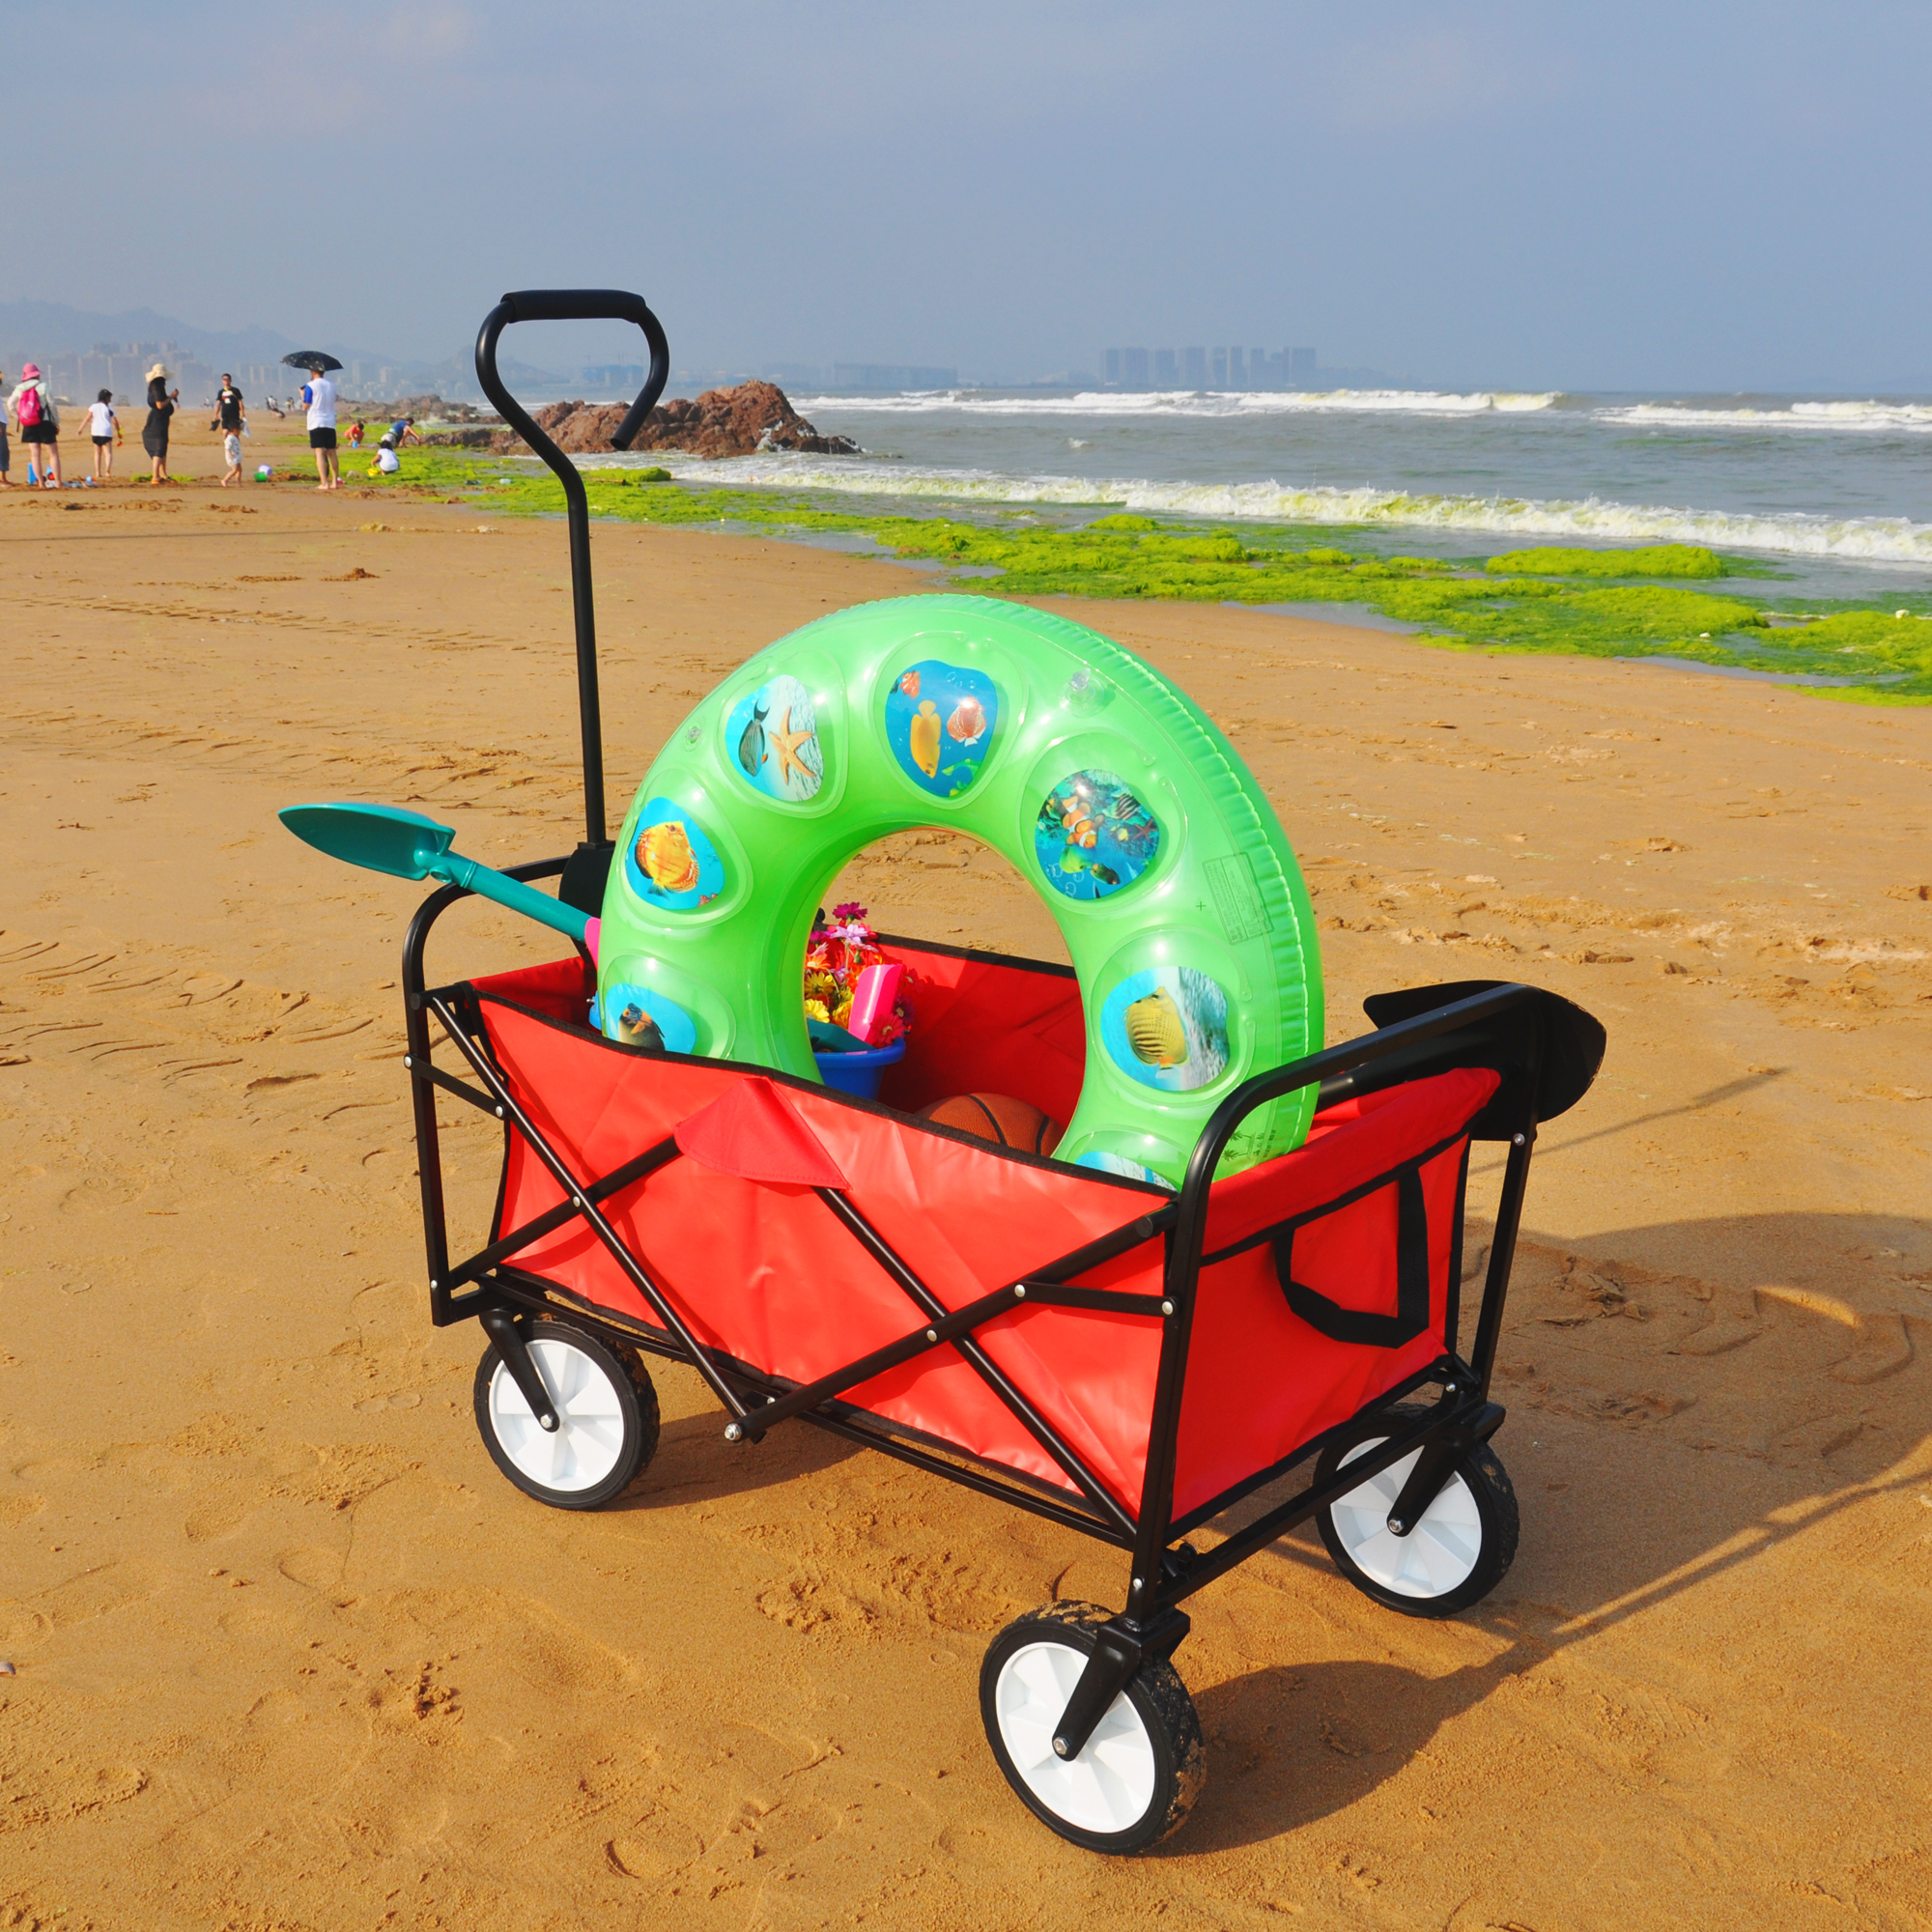 Beach Wagons with Big Wheels for Sand, Sturdy Steel Frame Collapsible Wagon, Foldable Wagon, Grocery Wagon with 2 Mesh Cup Holders, Adjustable Handle for Garden Shopping Picnic Beach, Red, Q3809 - image 1 of 11